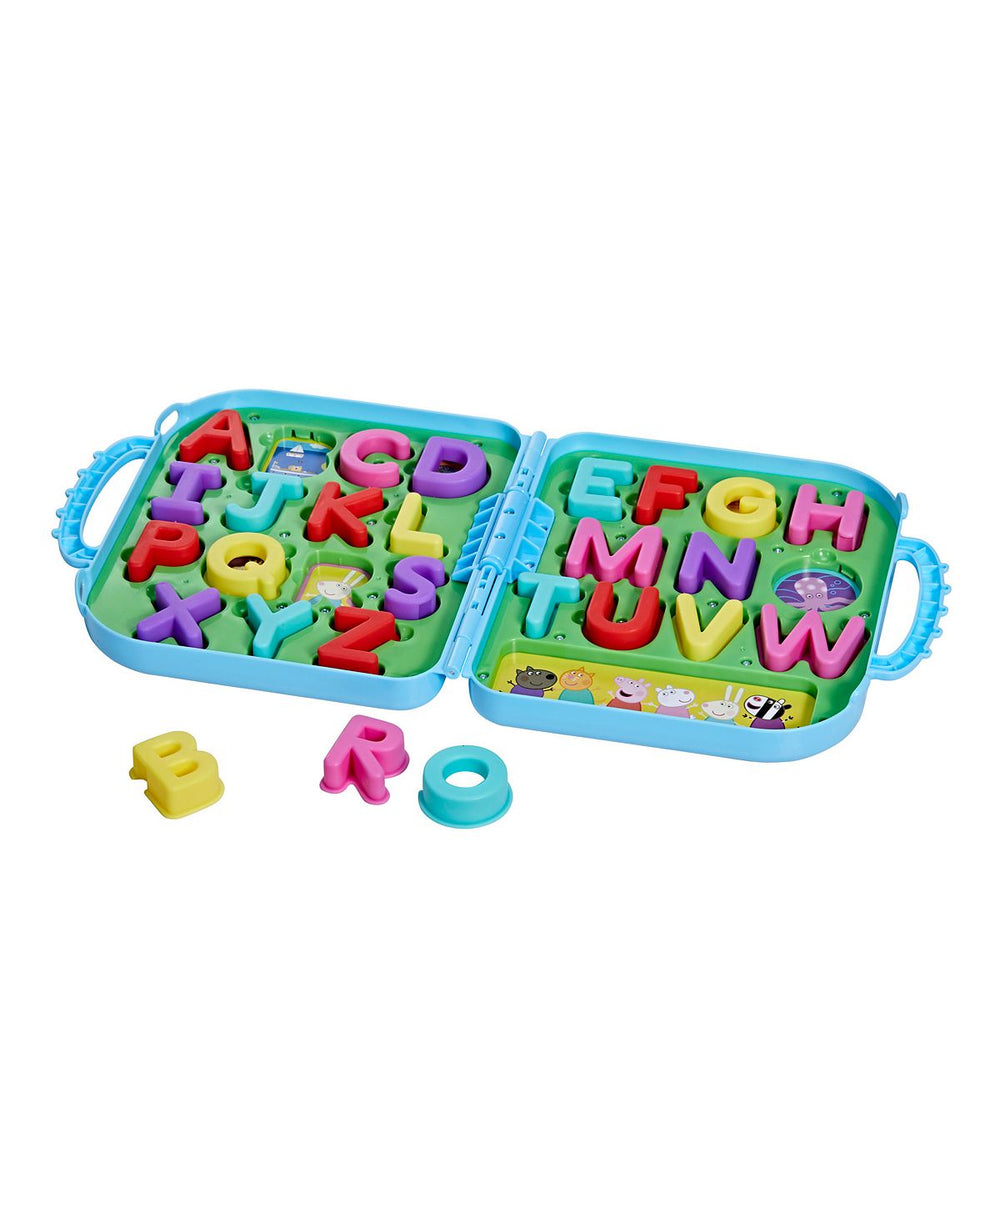 Peppa Pig - Peppa's Alphabet Case - Interactive Educational Toy